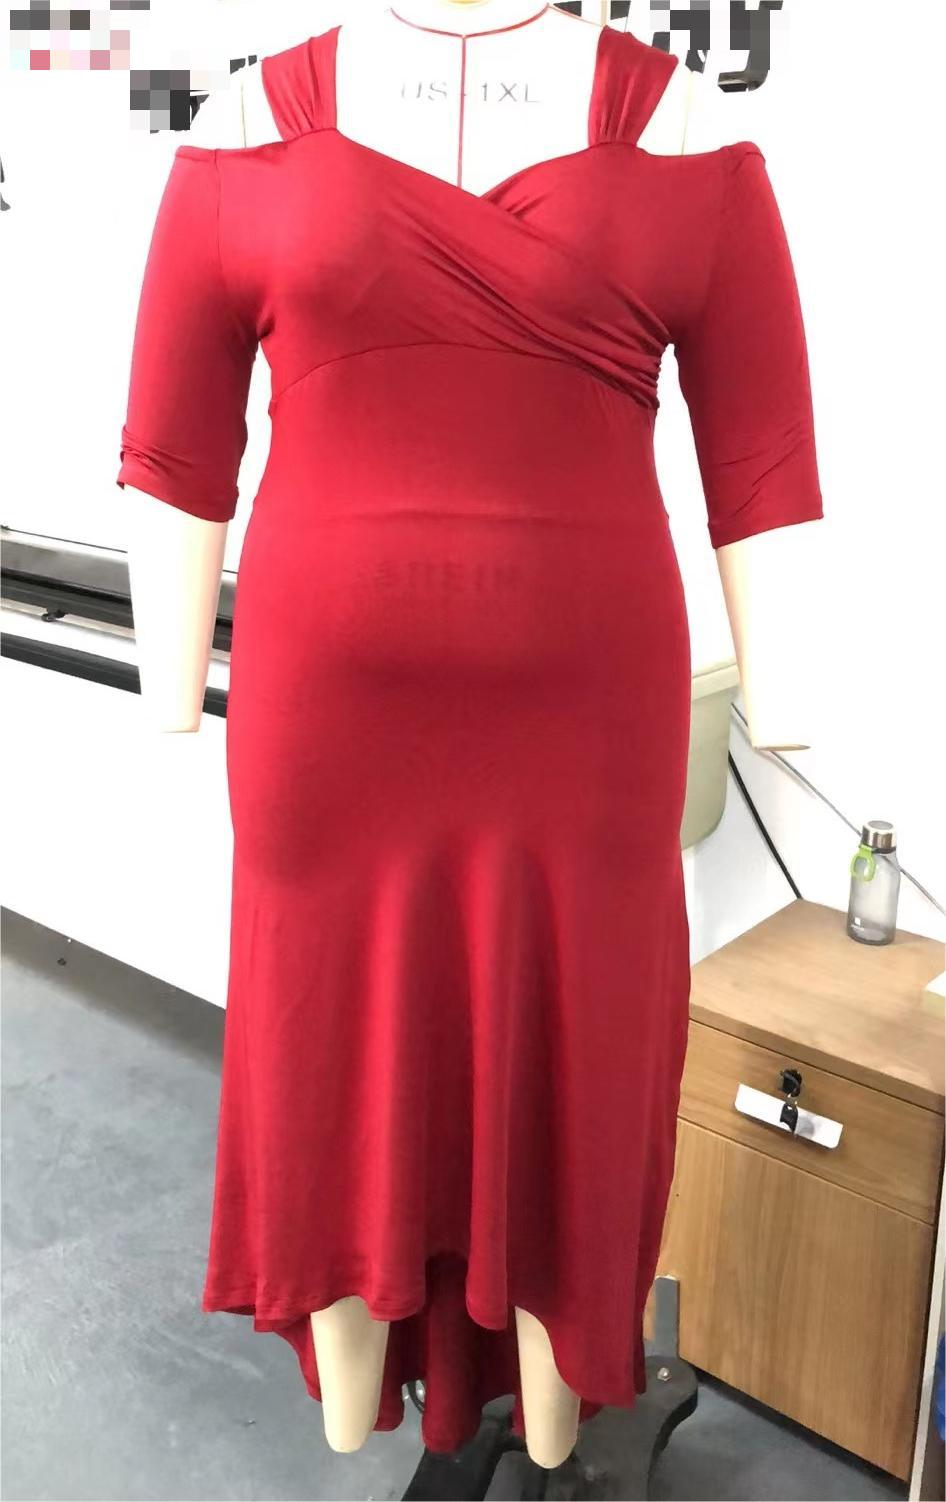 Plus Size Solid Color Sexy Strapless Large Swing Dress Summer Women Clothes Maxi Dress